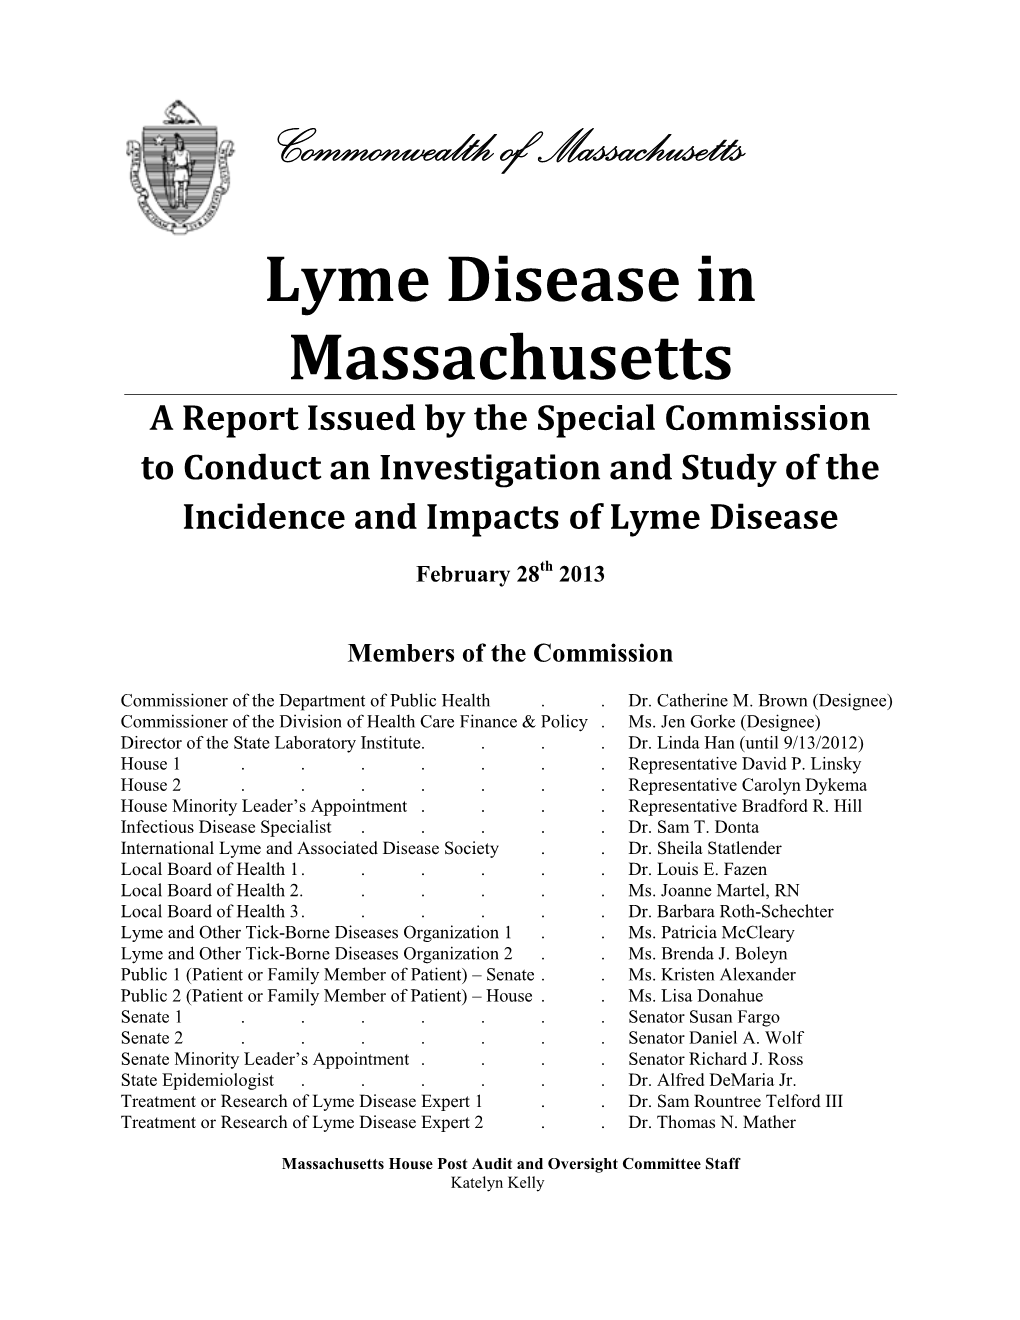 Lyme Disease in Massachusetts a Report Issued by the Special Commission to Conduct an Investigation and Study of the Incidence and Impacts of Lyme Disease